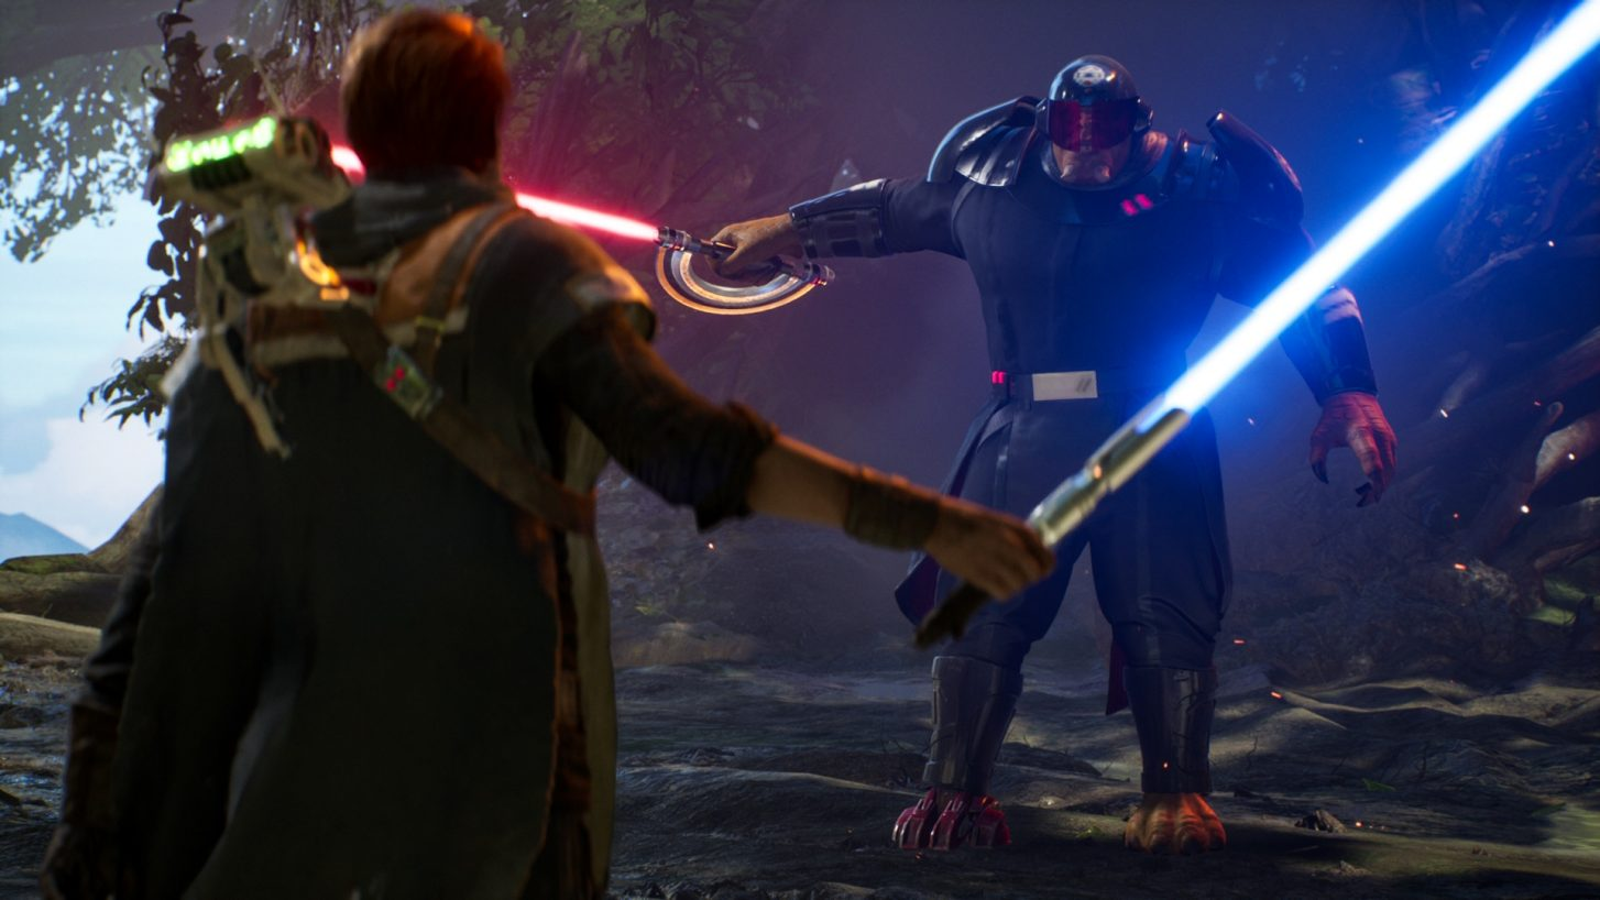 Star Wars Jedi: Fallen Order bosses: every boss in the game and